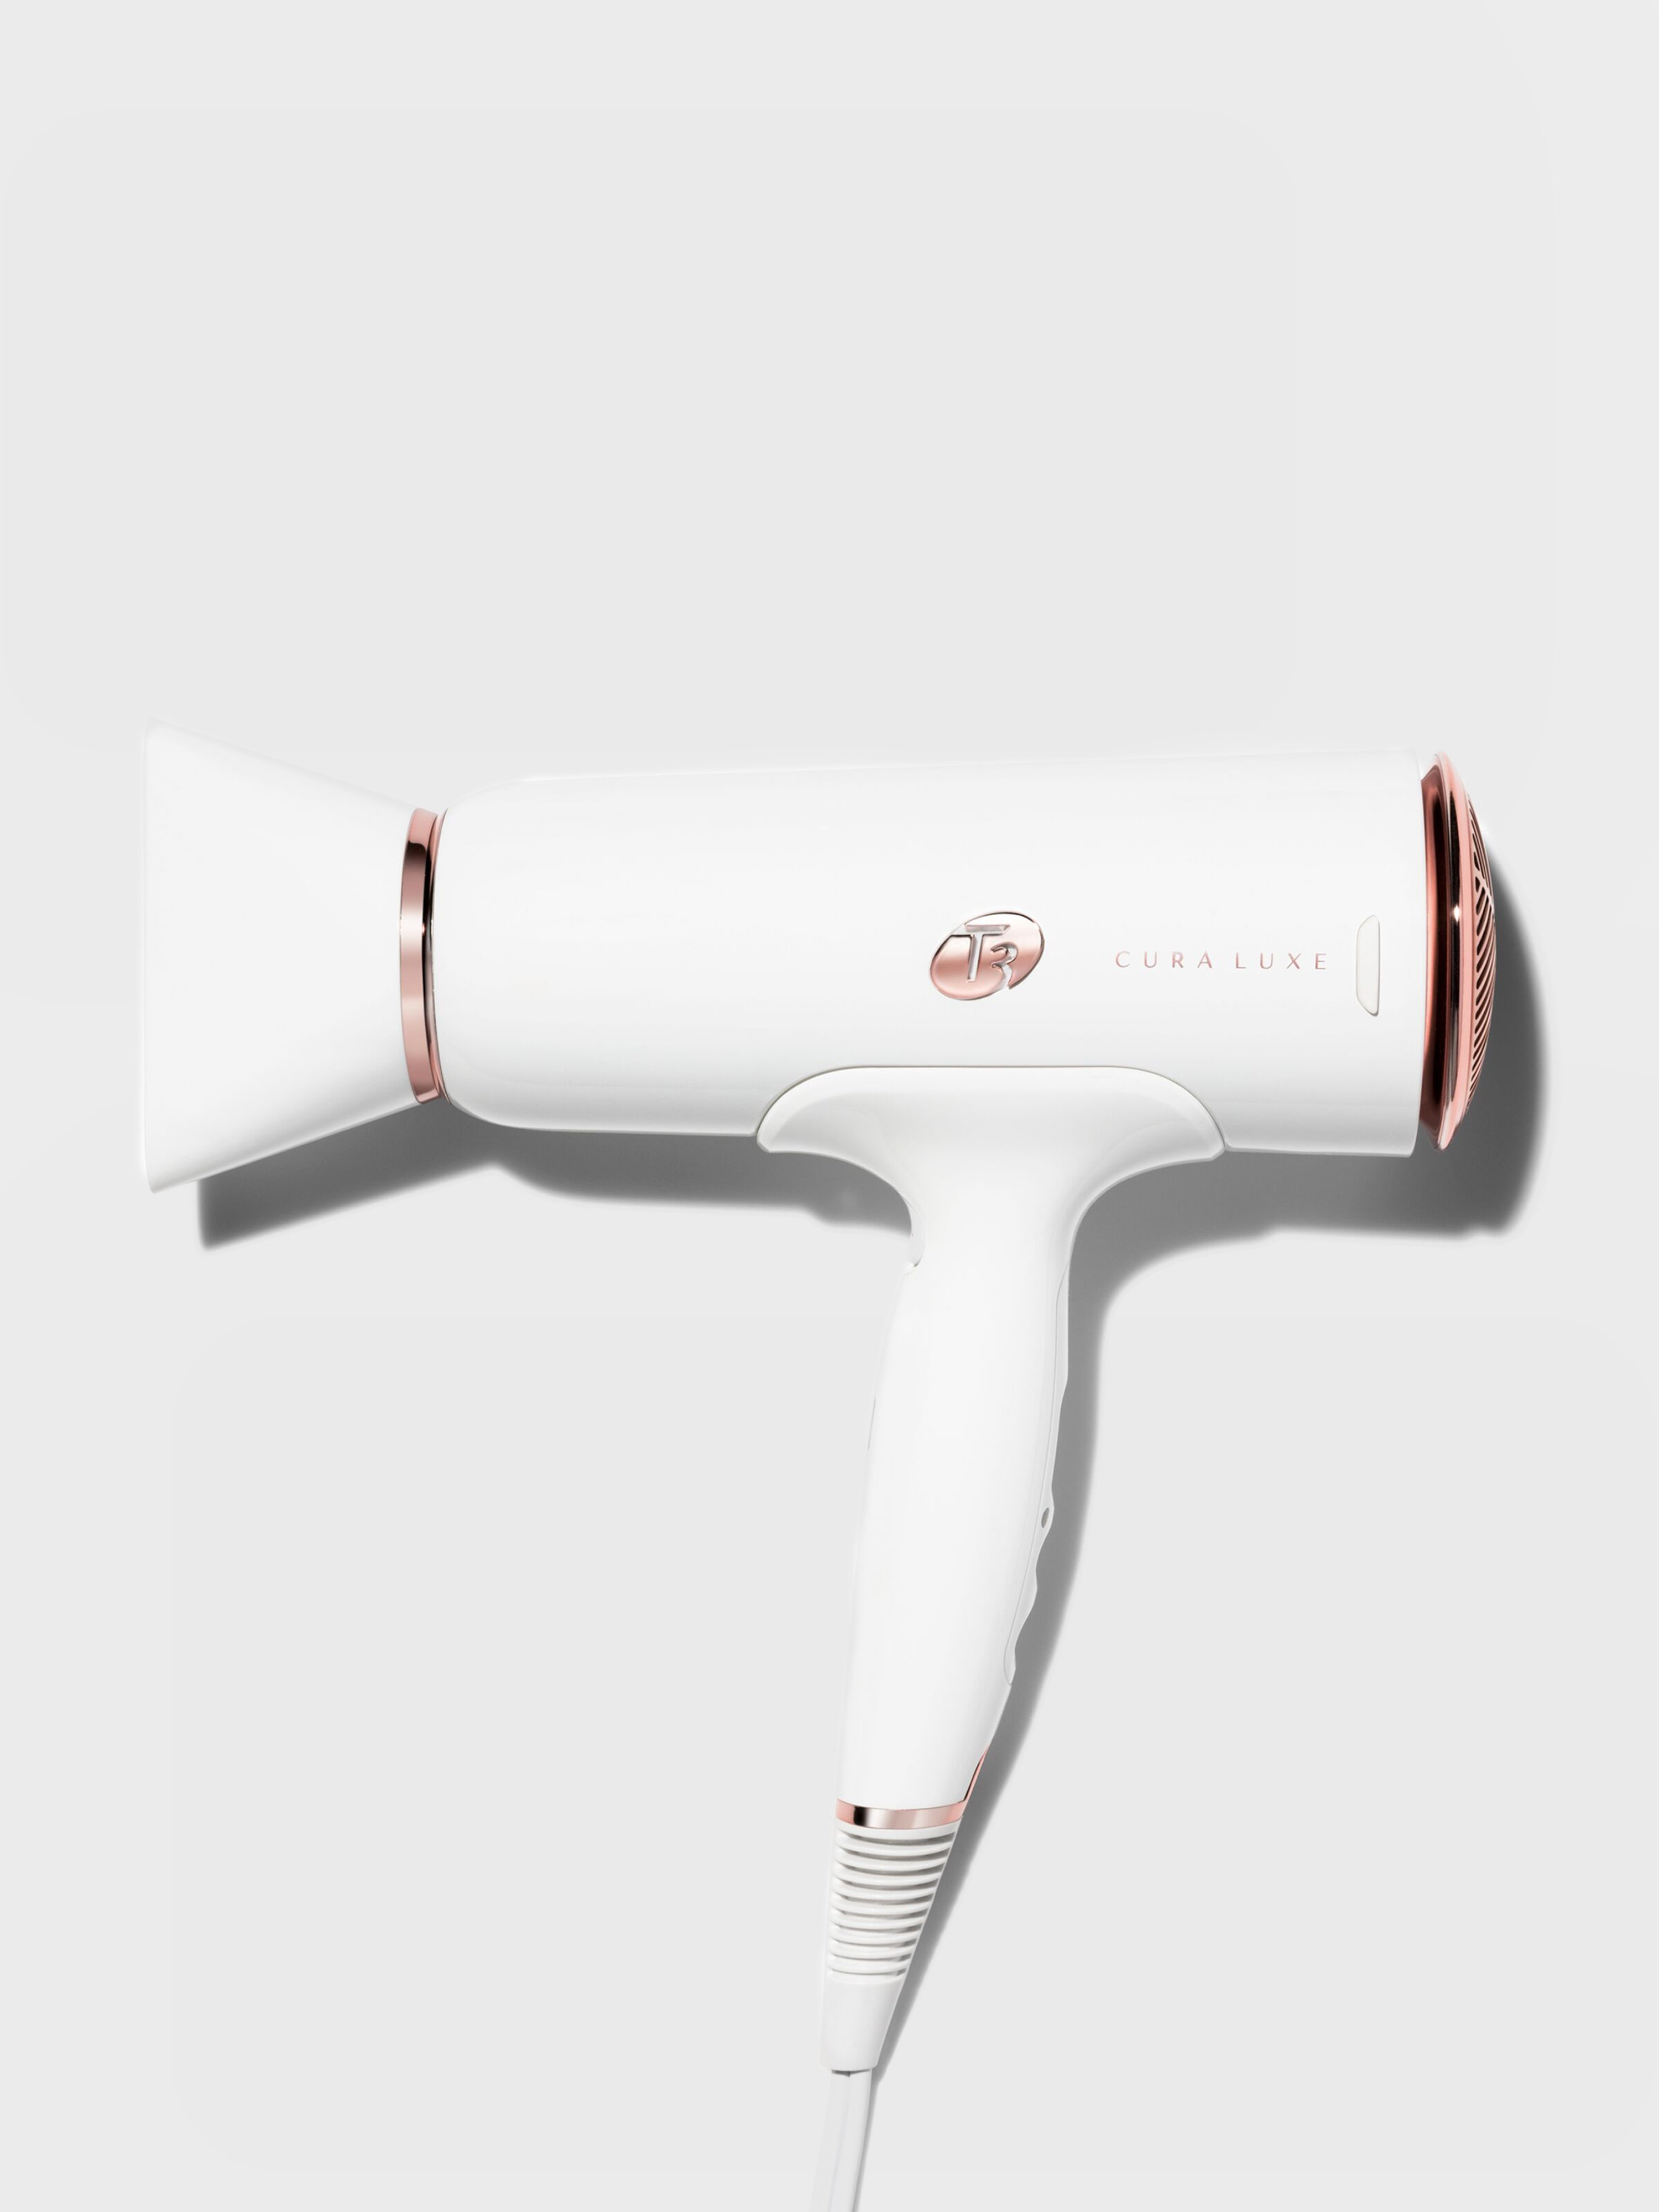 T3 Cura Luxe Professional Ionic Hair Dryer With Auto Pause Sensor In White/rose Gold